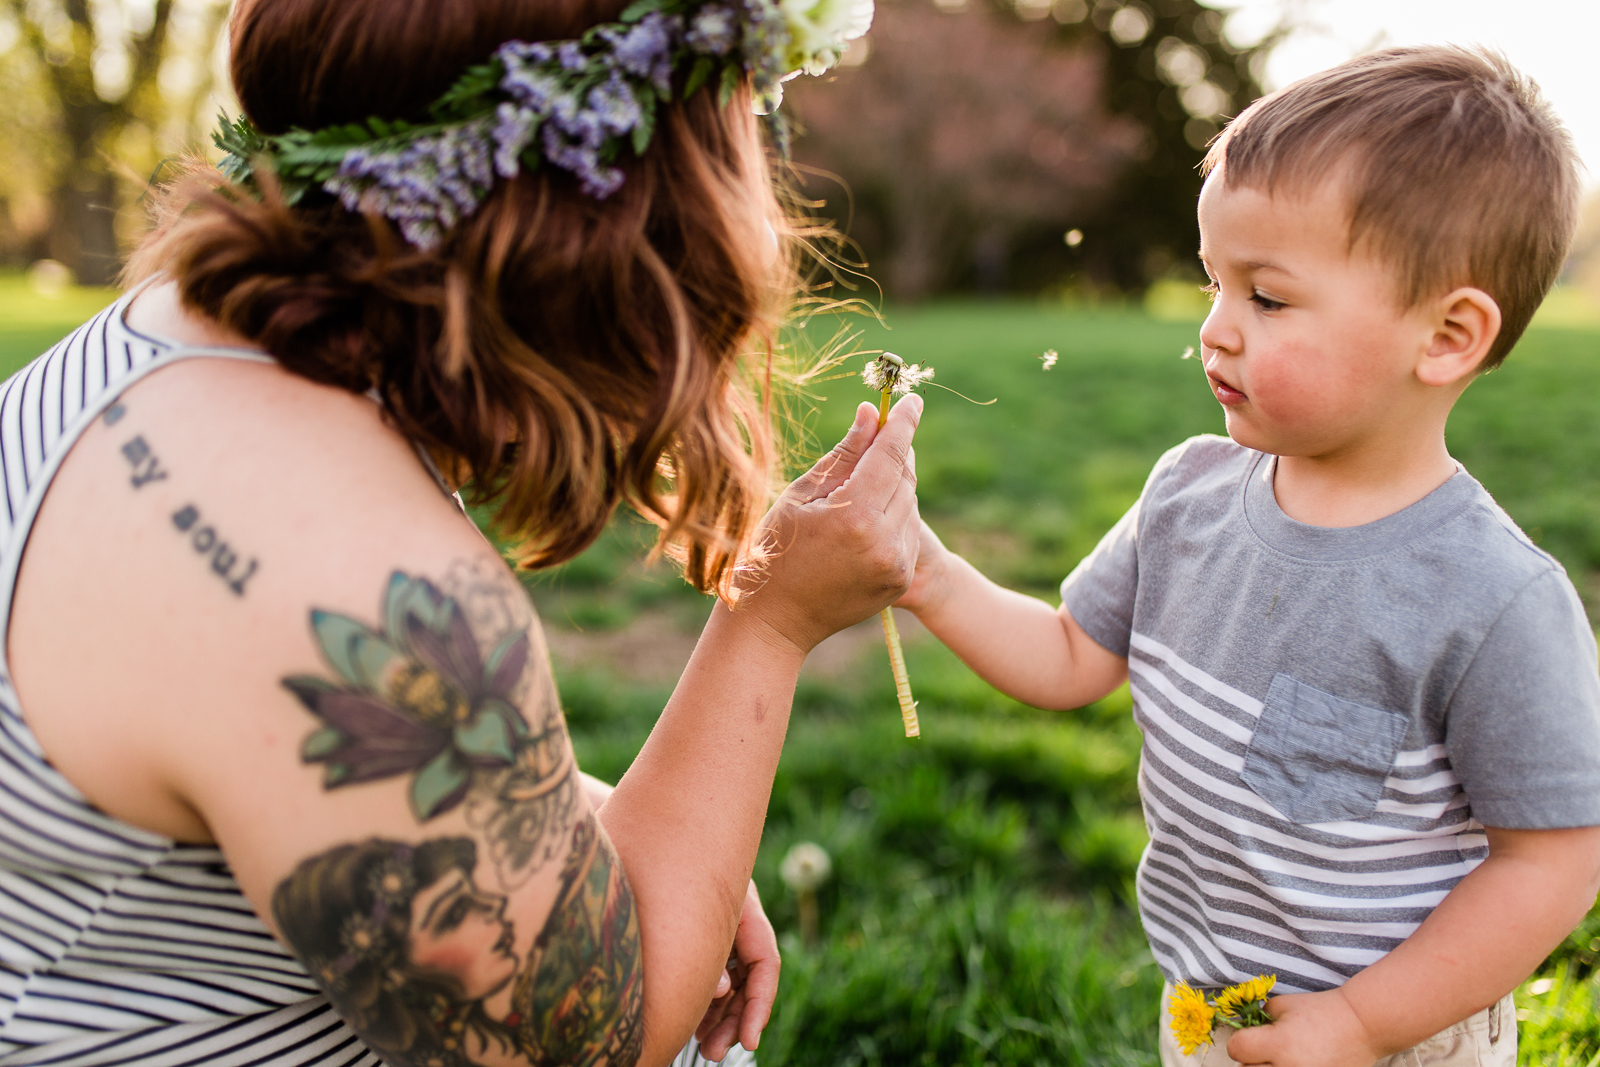  Mother blows dandelion with son at Loose Park, Kansas City lifestyle photographer, candid family photos, golden hour session, Rebecca Clair Photography 